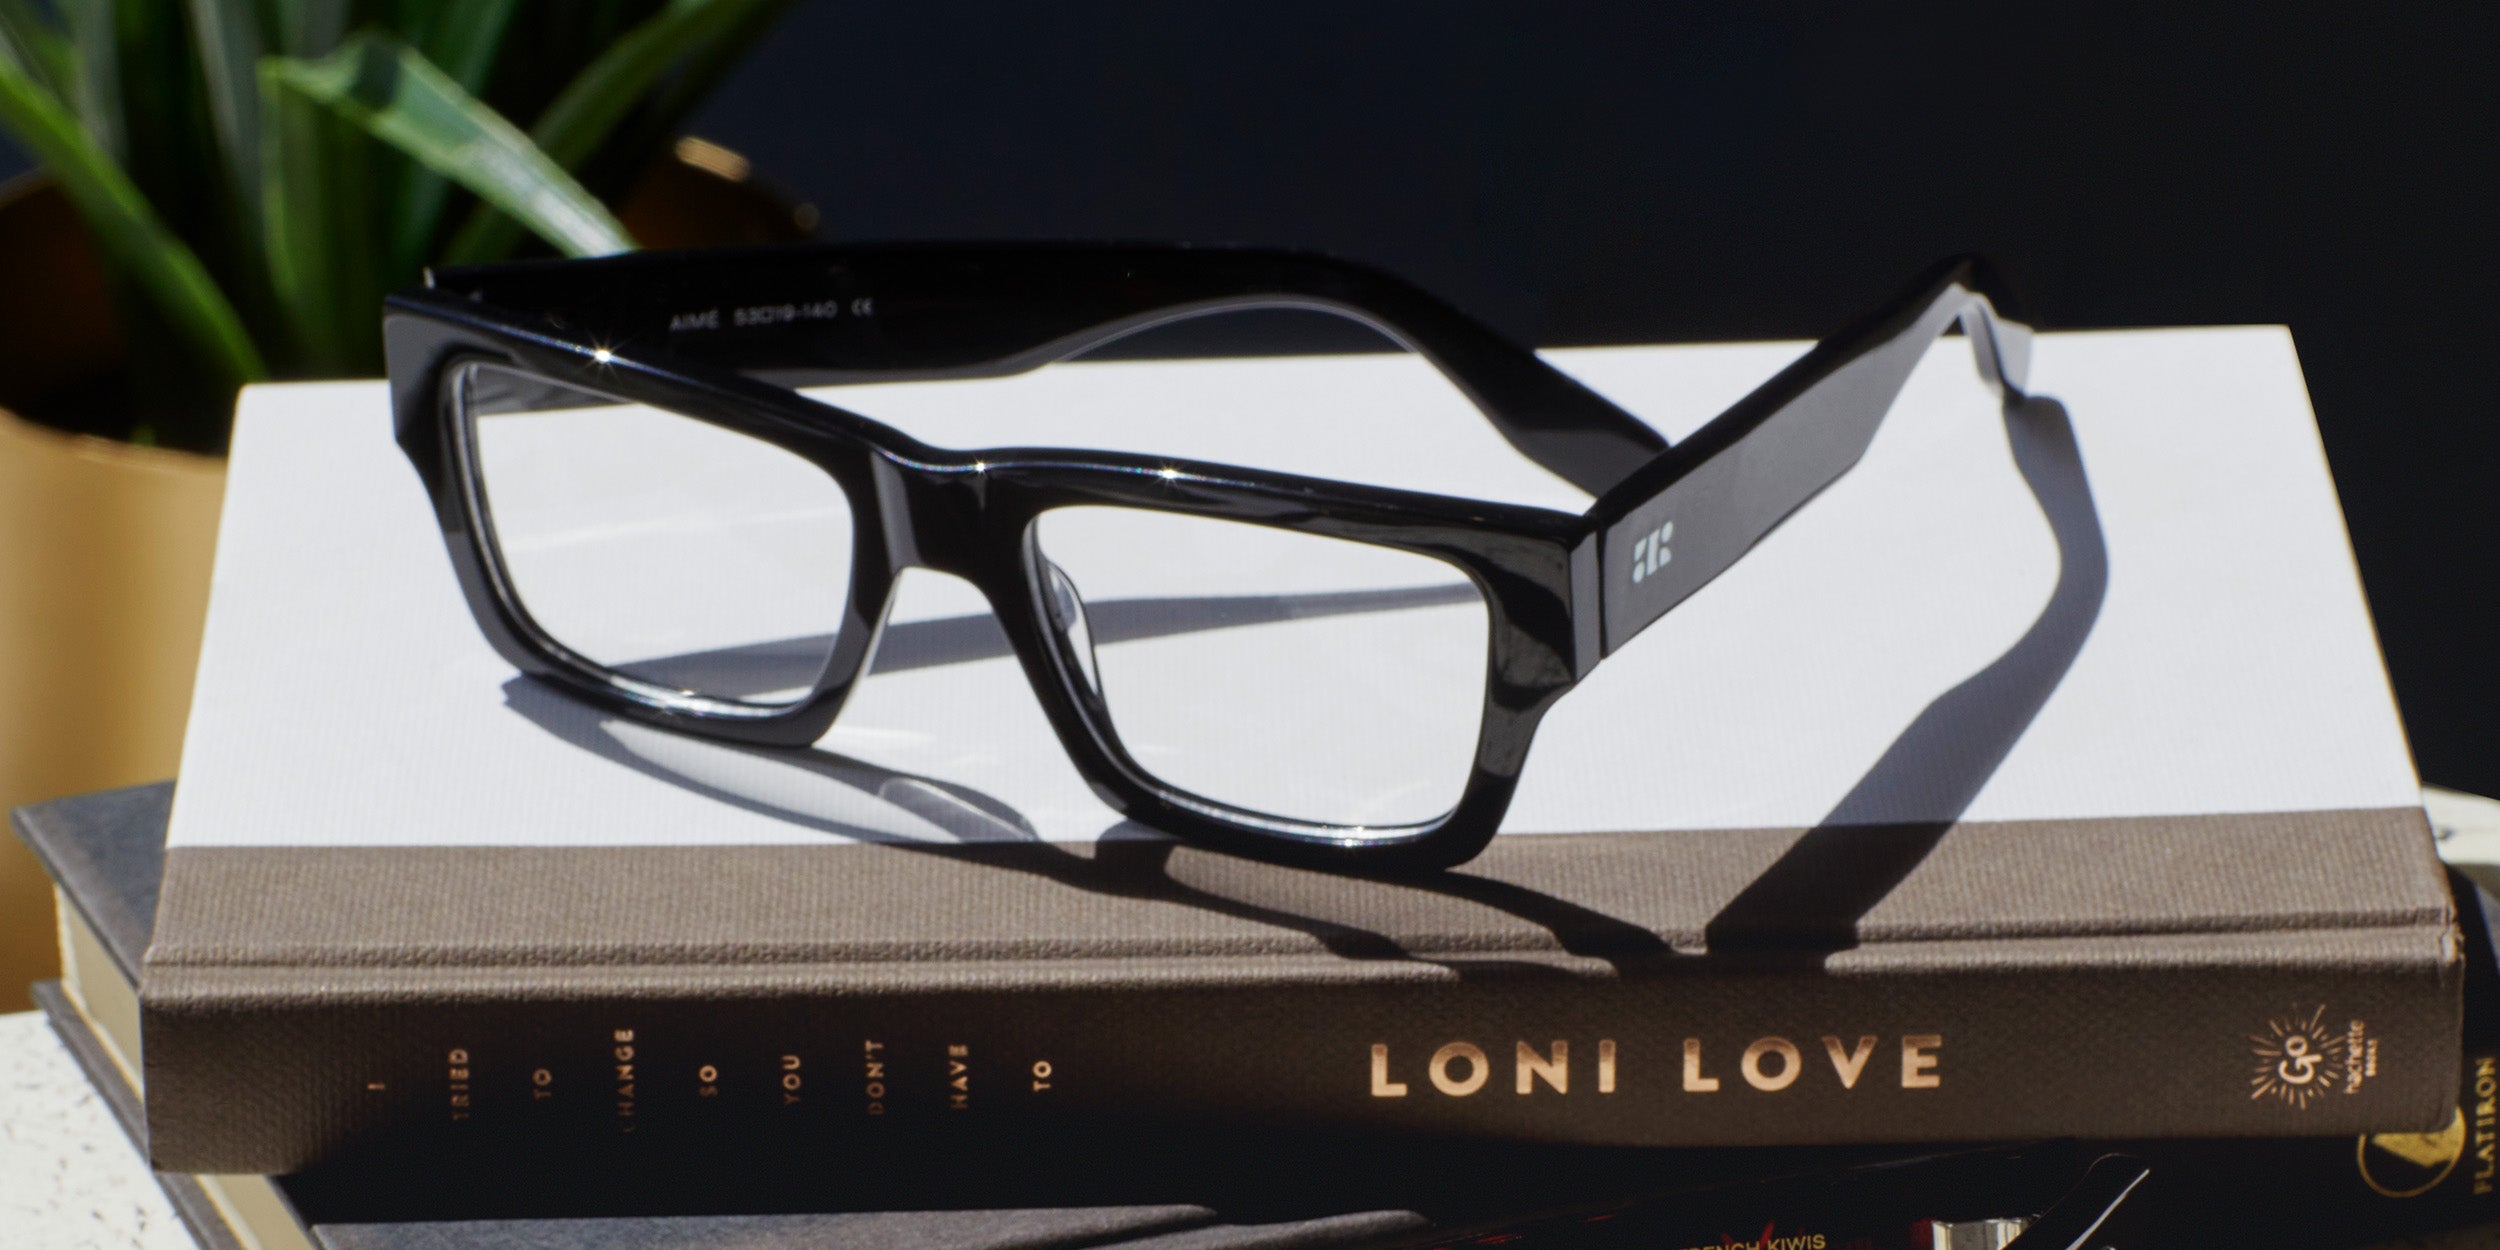 Photo Details of Aimé Dark Tortoise Reading Glasses in a room